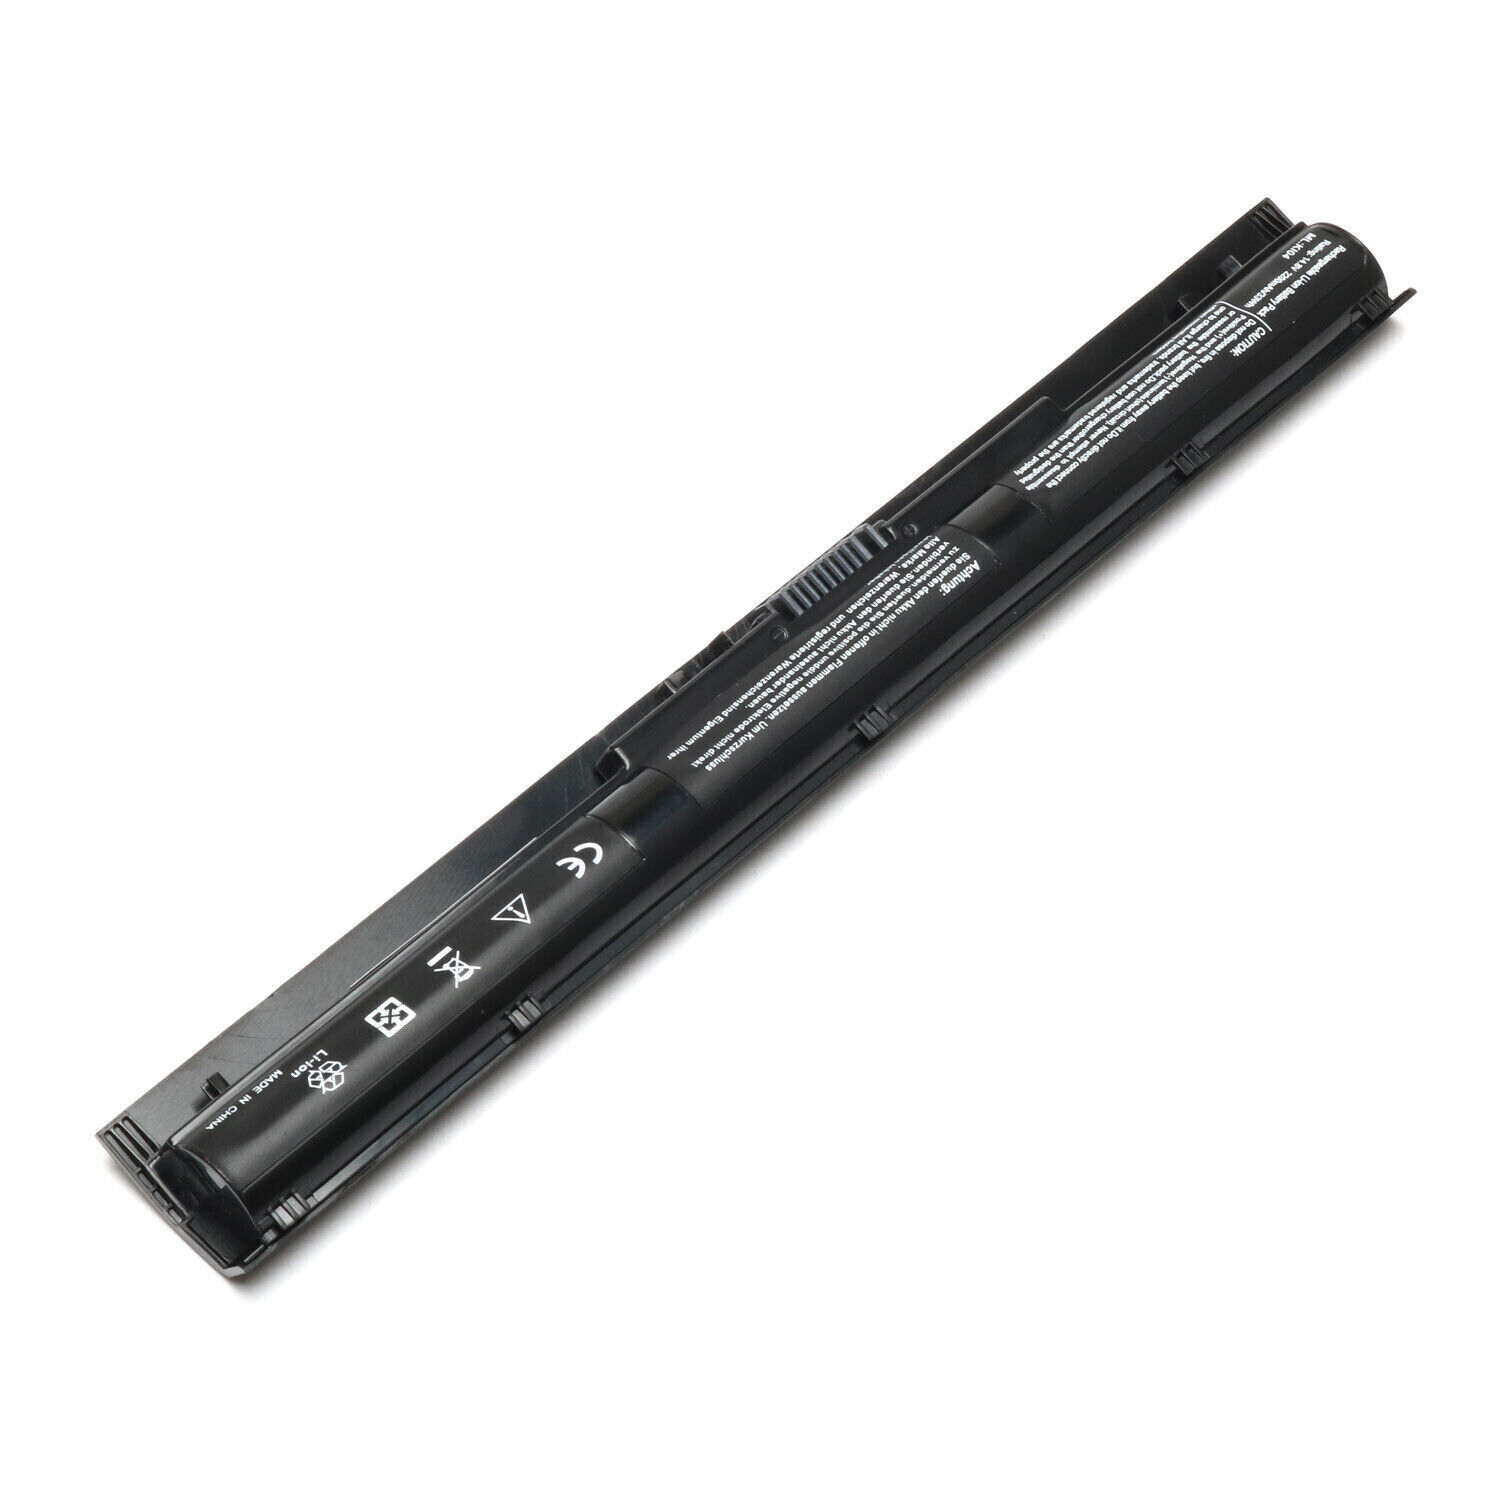 New Battery for HP Pavilion 14 14-ab000 14-ab100 14t-ab000 14t-ab100 14-ab166us